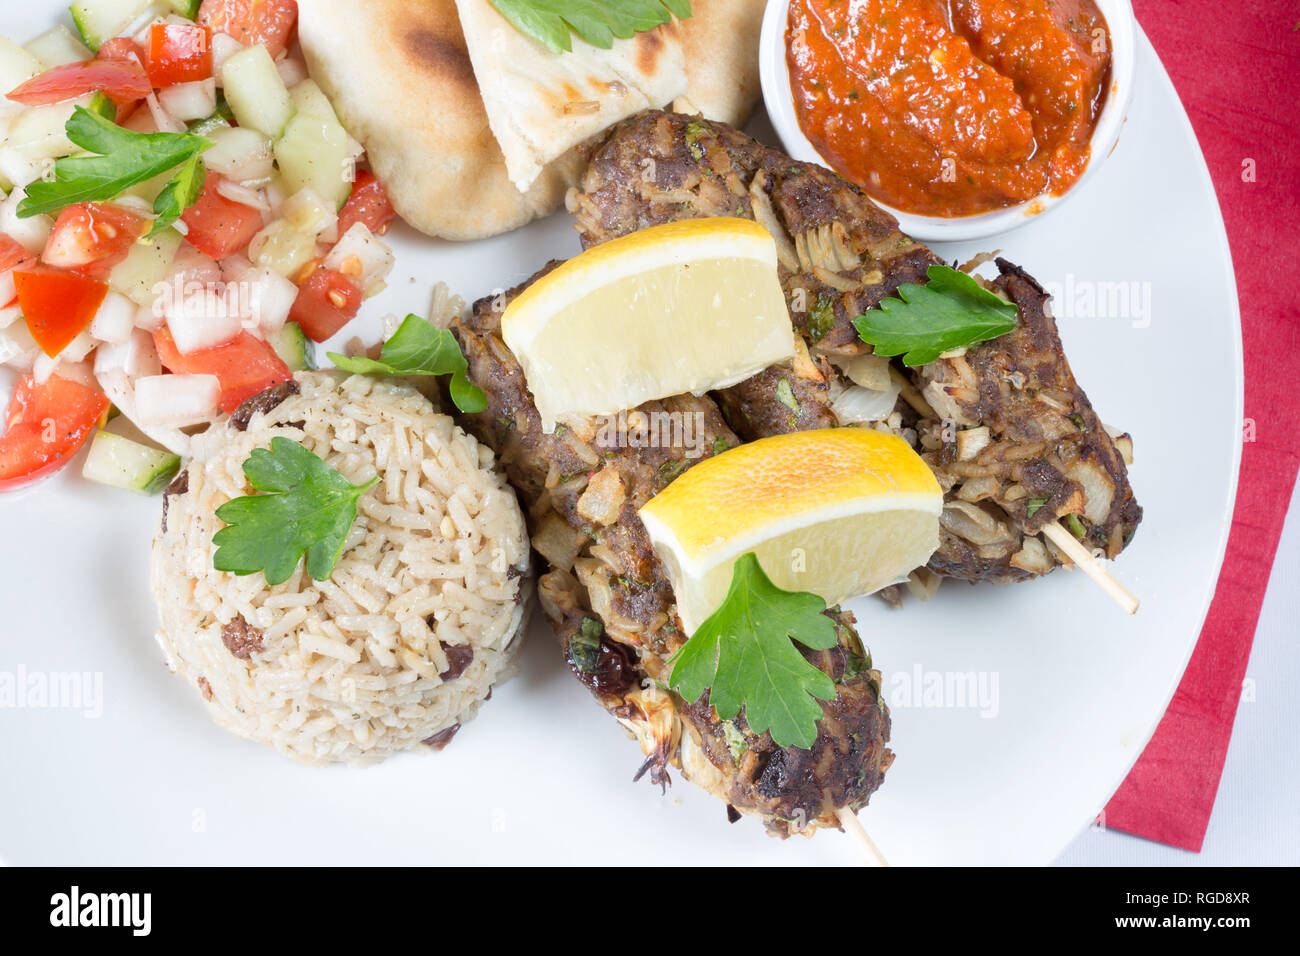 A Turkish dish of Lamb Sis Kebap, with fragrant rice, side salad and flatbread Stock Photo